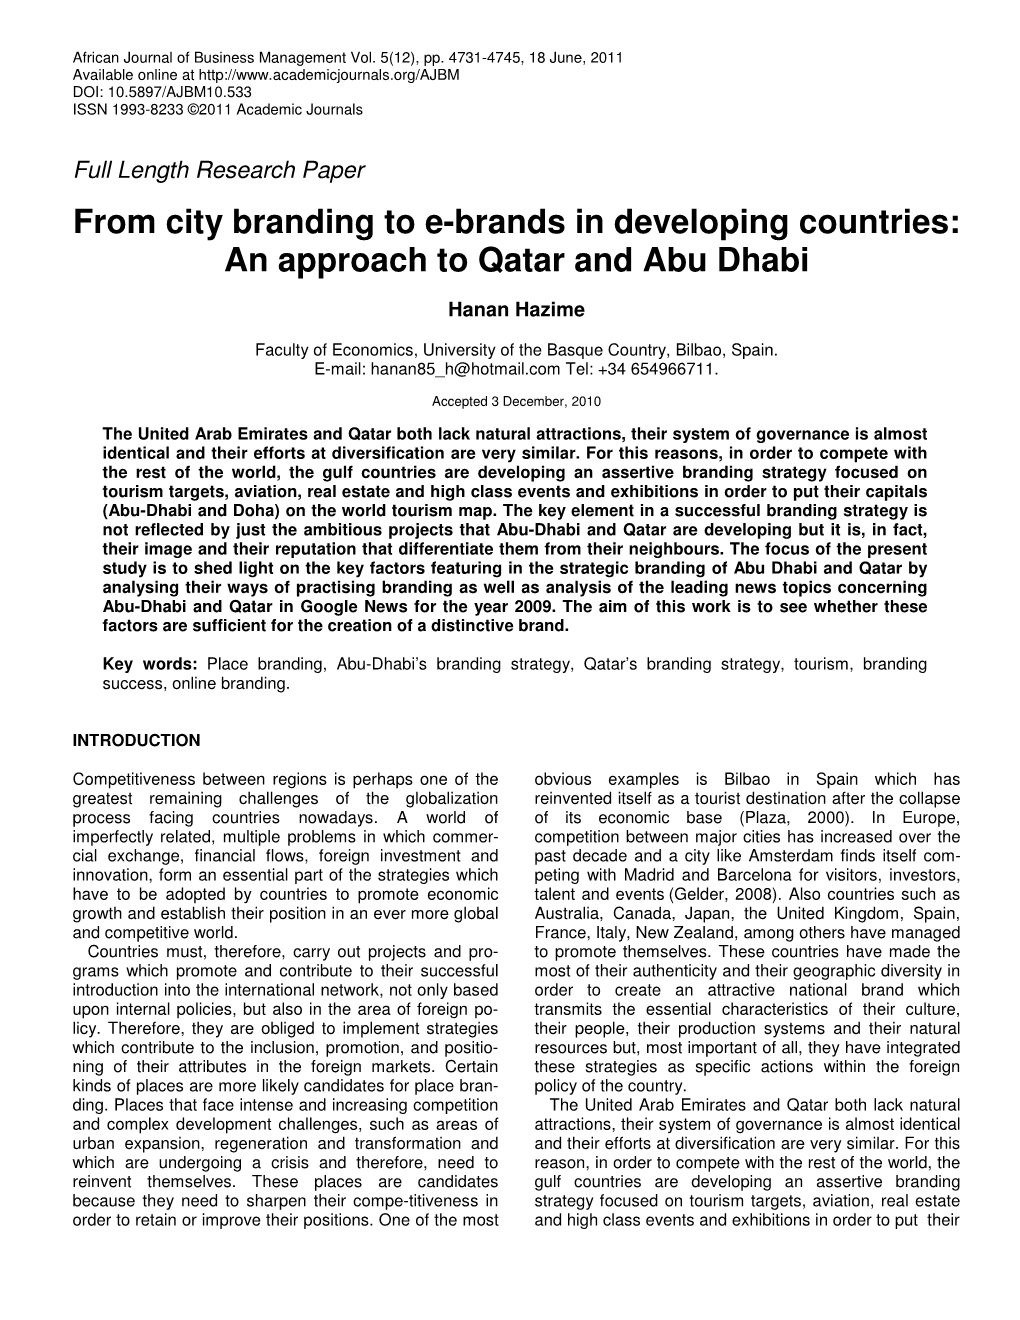 From City Branding to E-Brands in Developing Countries: an Approach to Qatar and Abu Dhabi